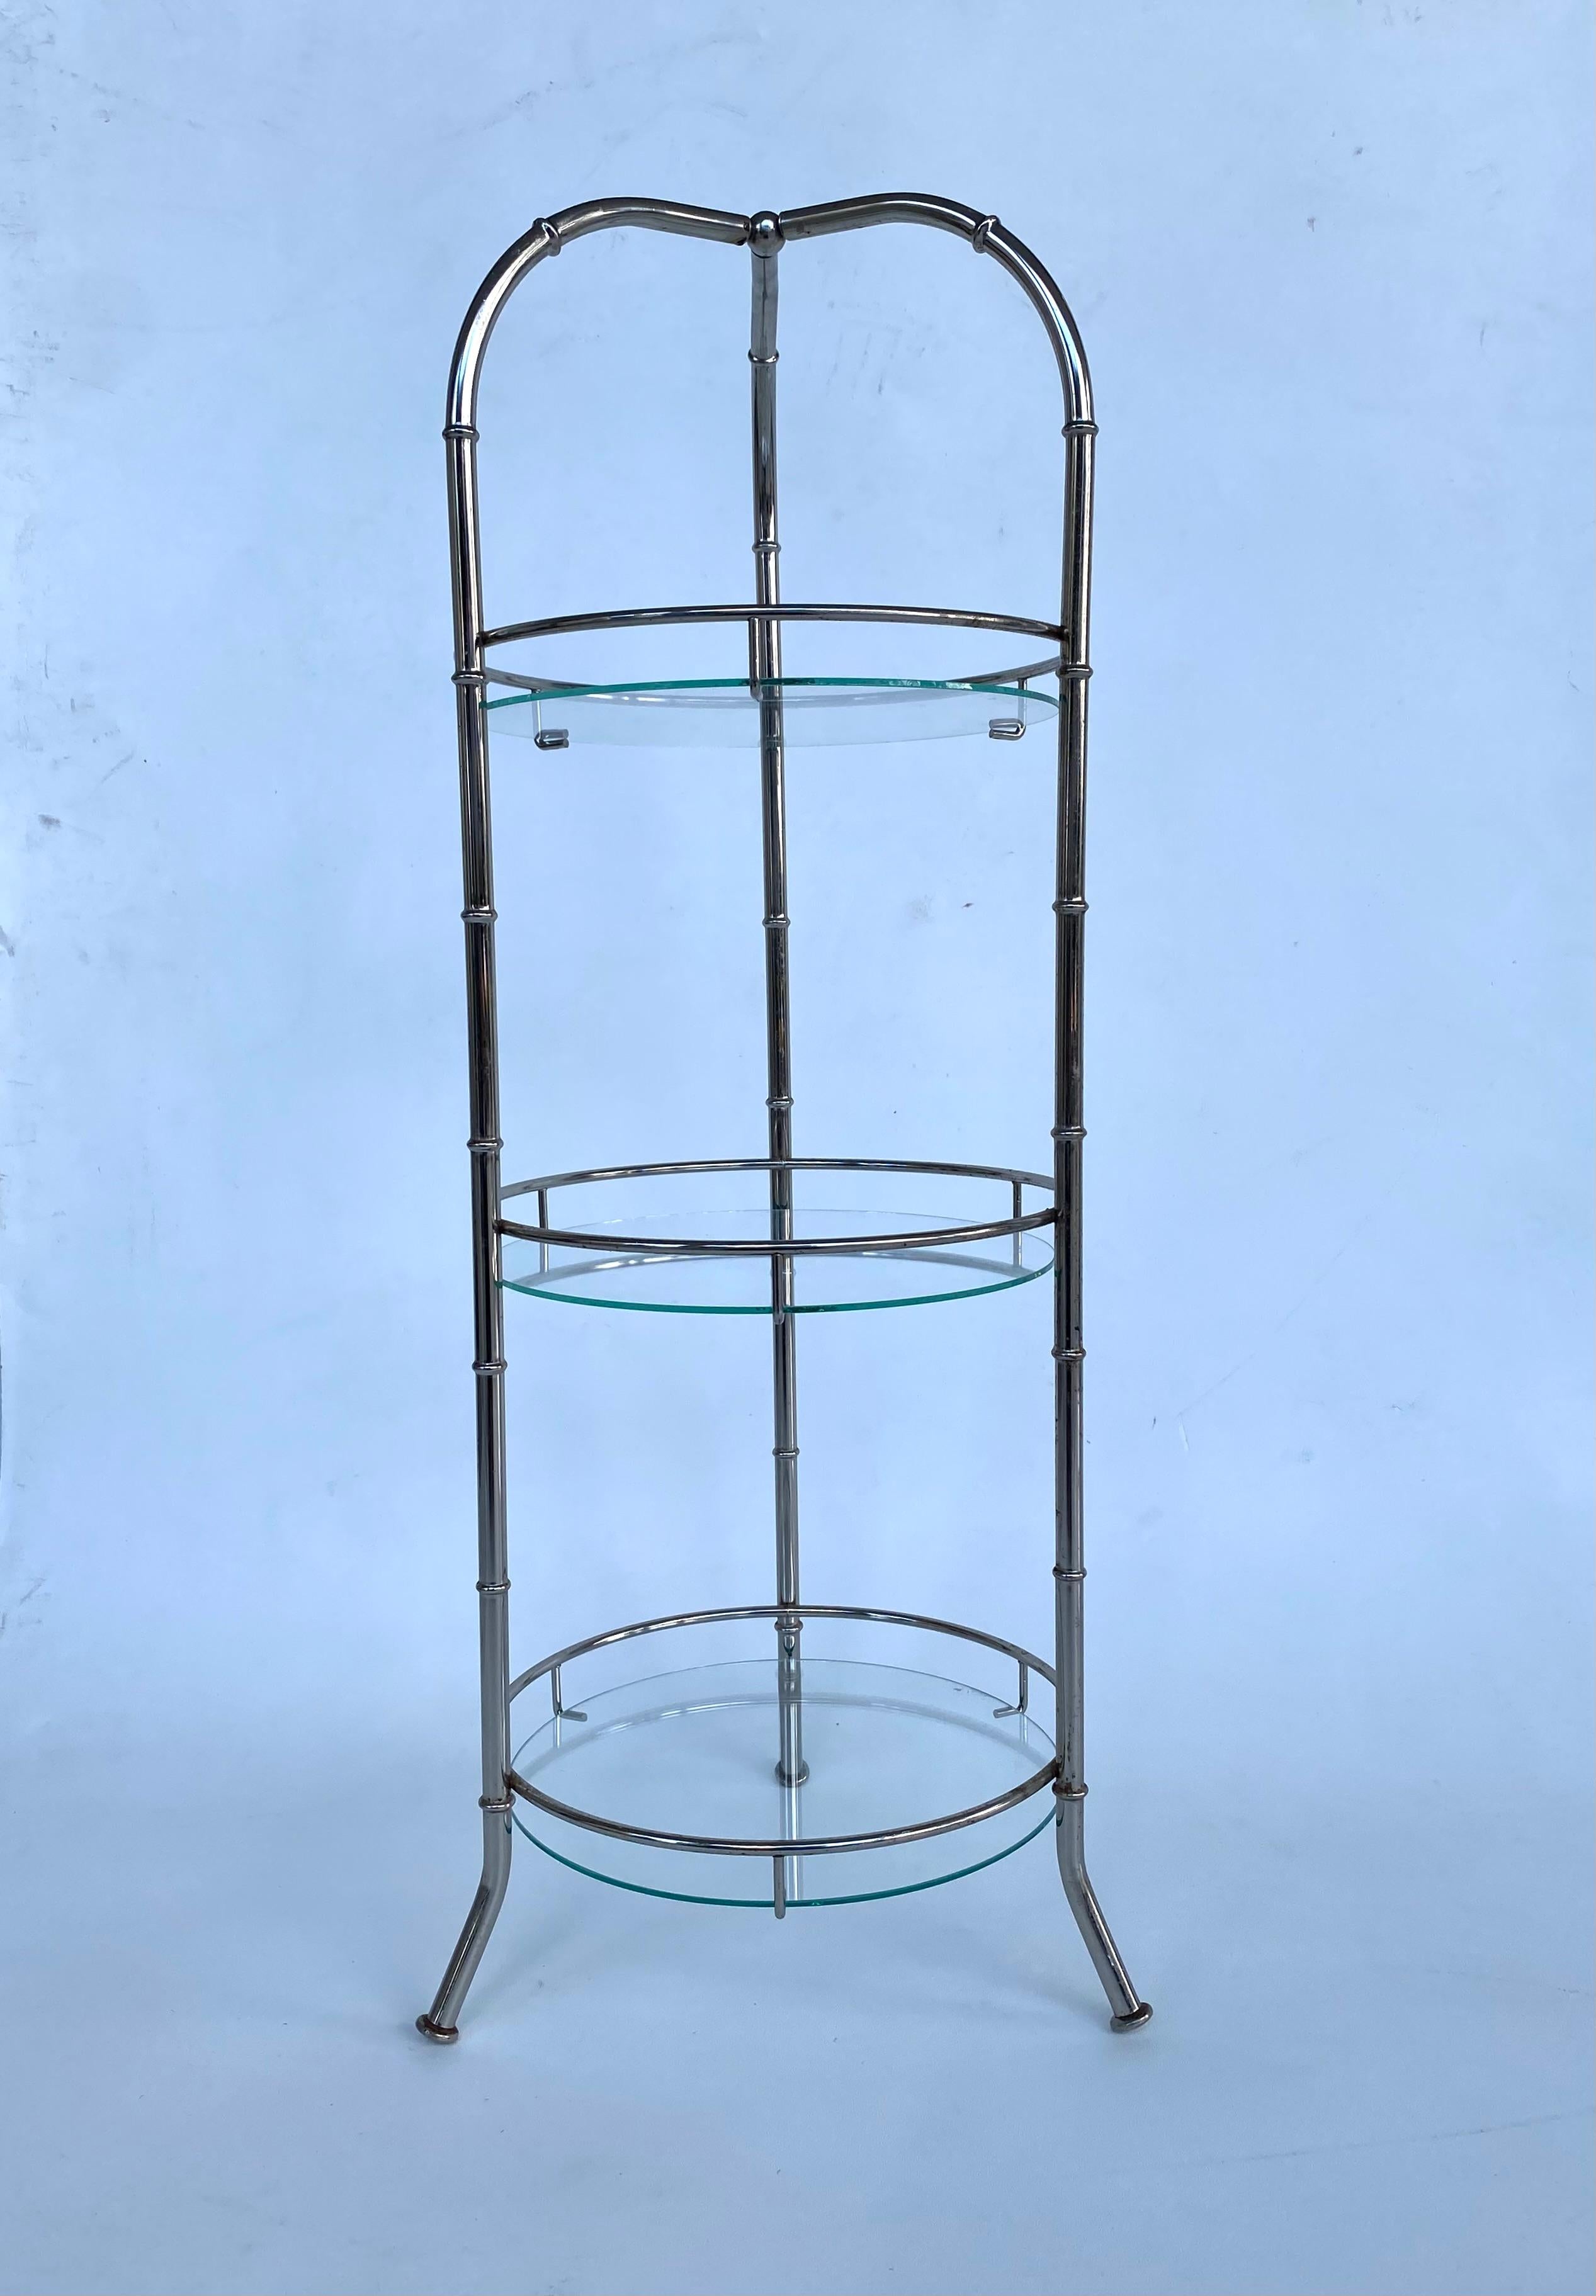 Vintage 3-tiered Chromed Carrying Dessert Cake Stand with Glass Shelves

Offered for sale is a three-tiered chromed metal and glass cake stand with an arched top and three legs. The top arches function as handles to carry the stand as needed. Each